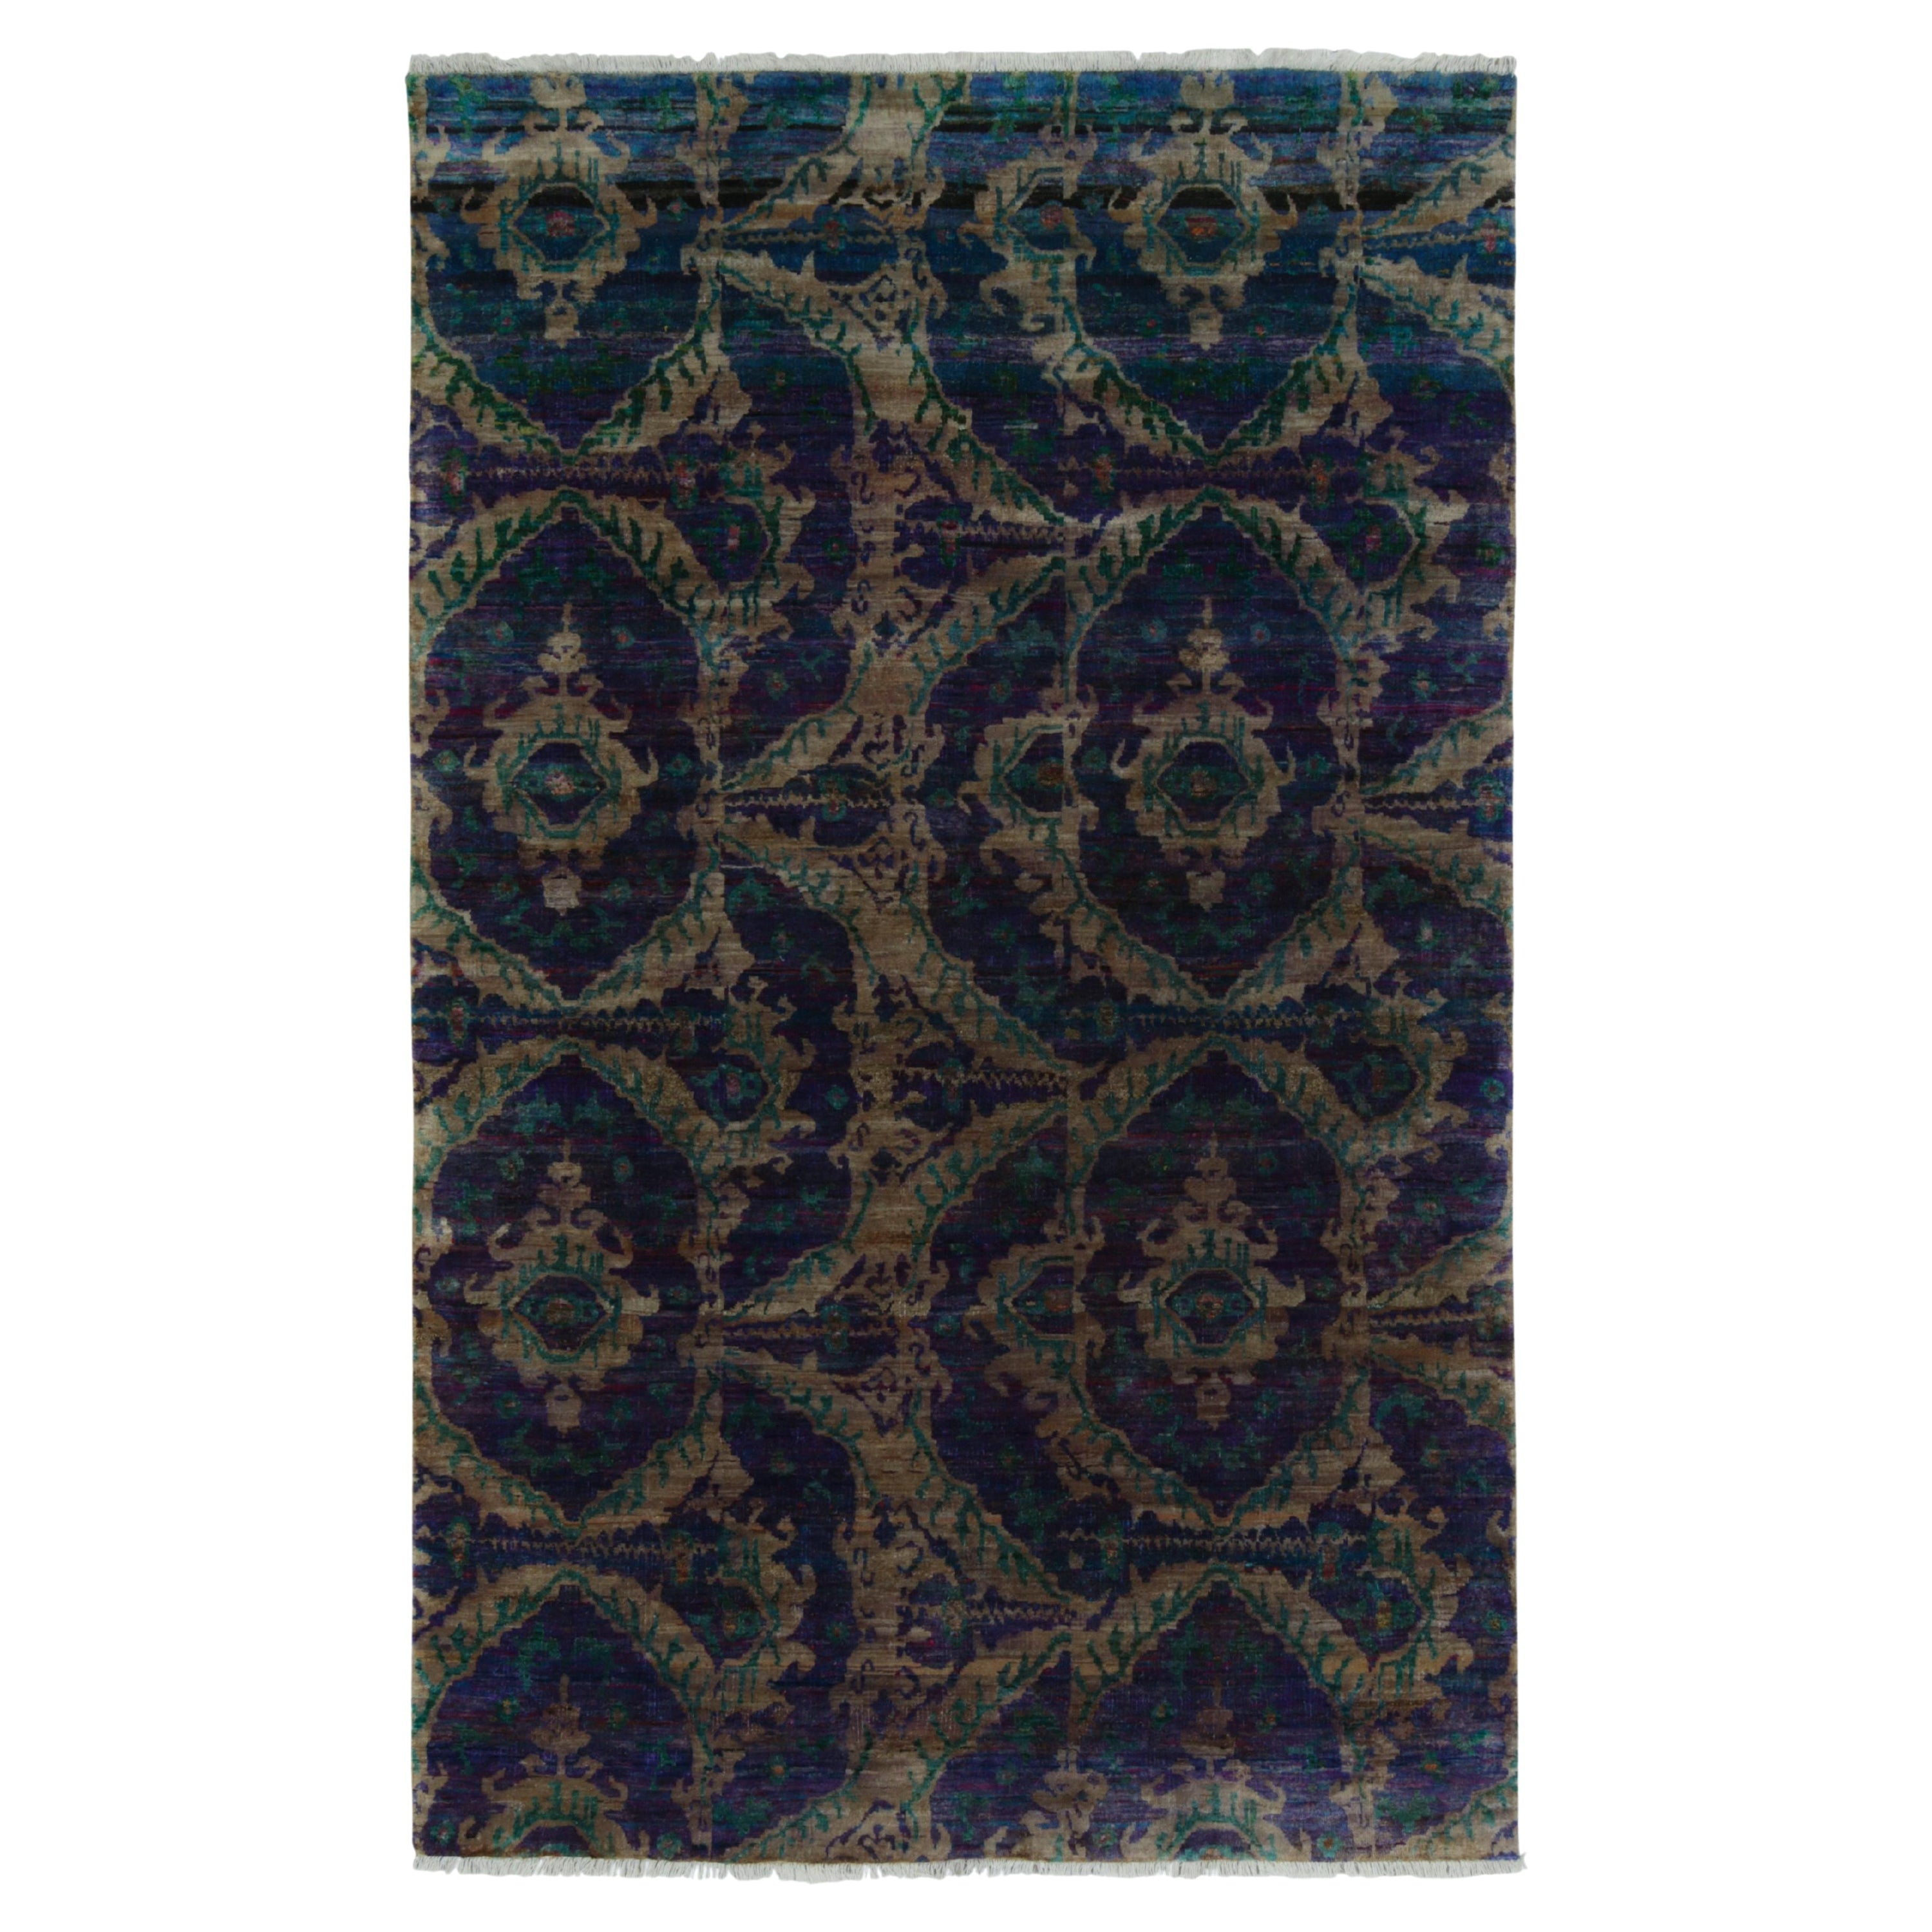 Rug & Kilim’s Tabriz Style Rug in Blue with Green and Brown Ikats Patterns